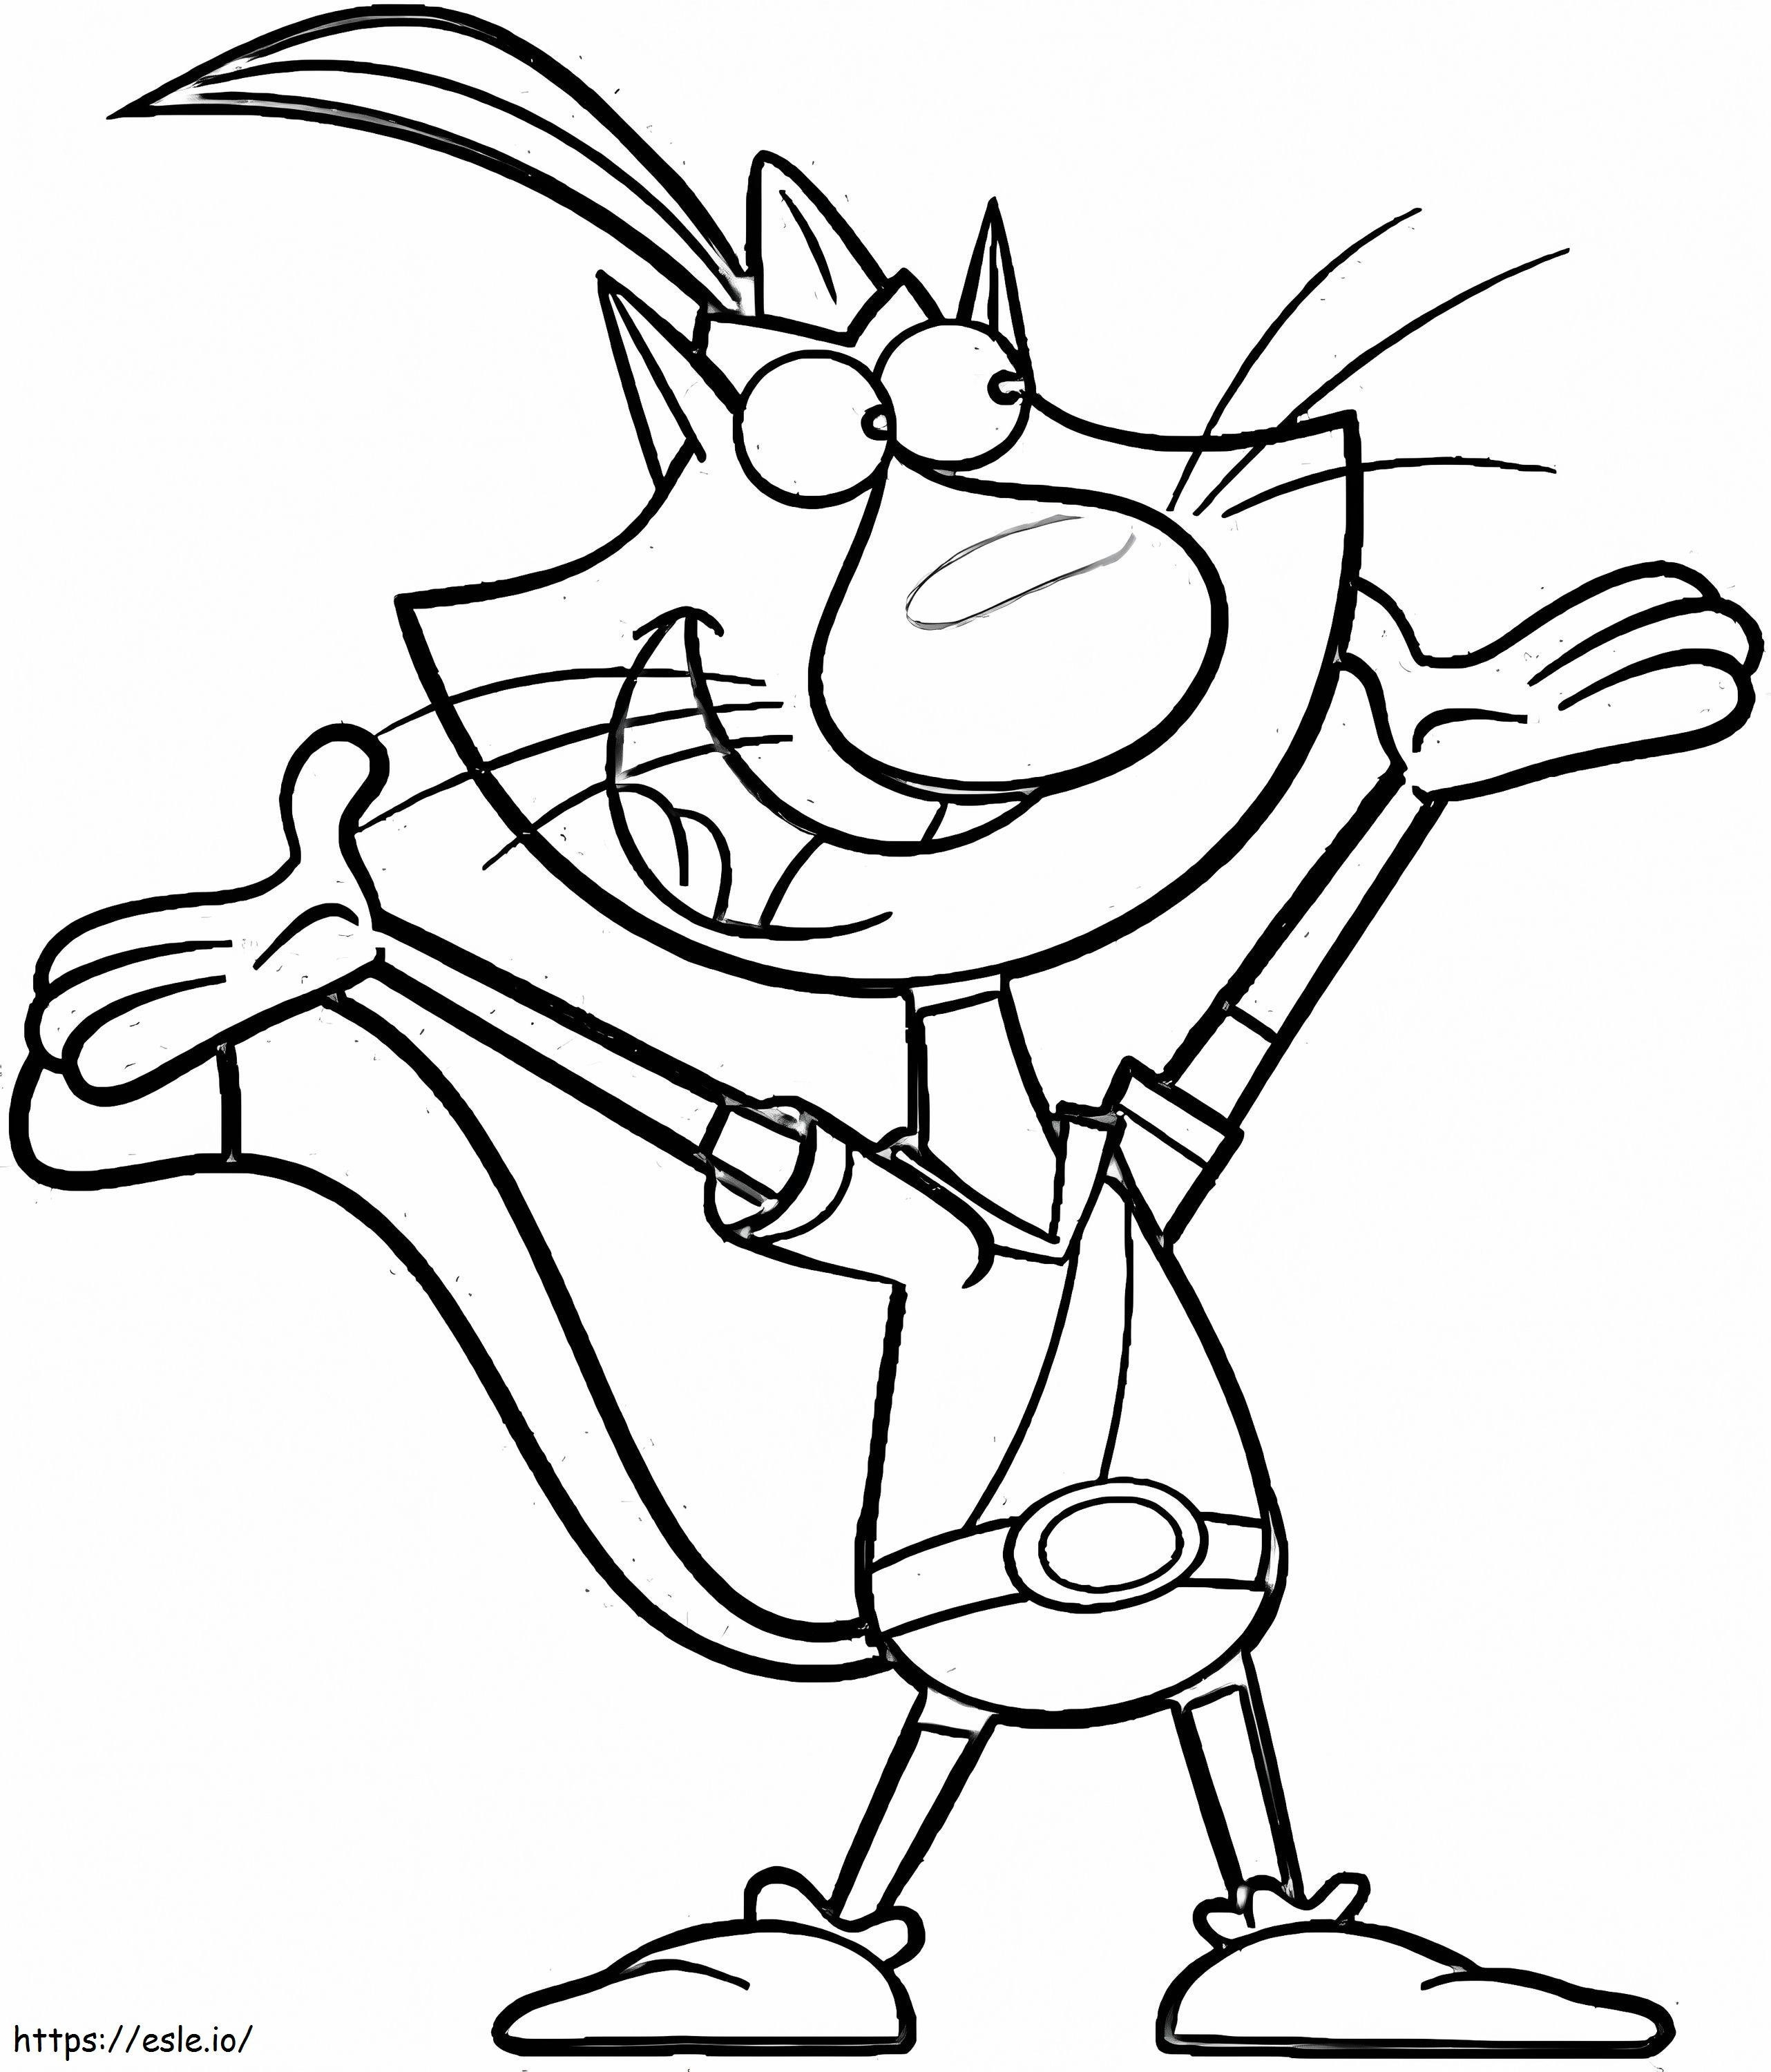 Nature Cat 5 coloring page